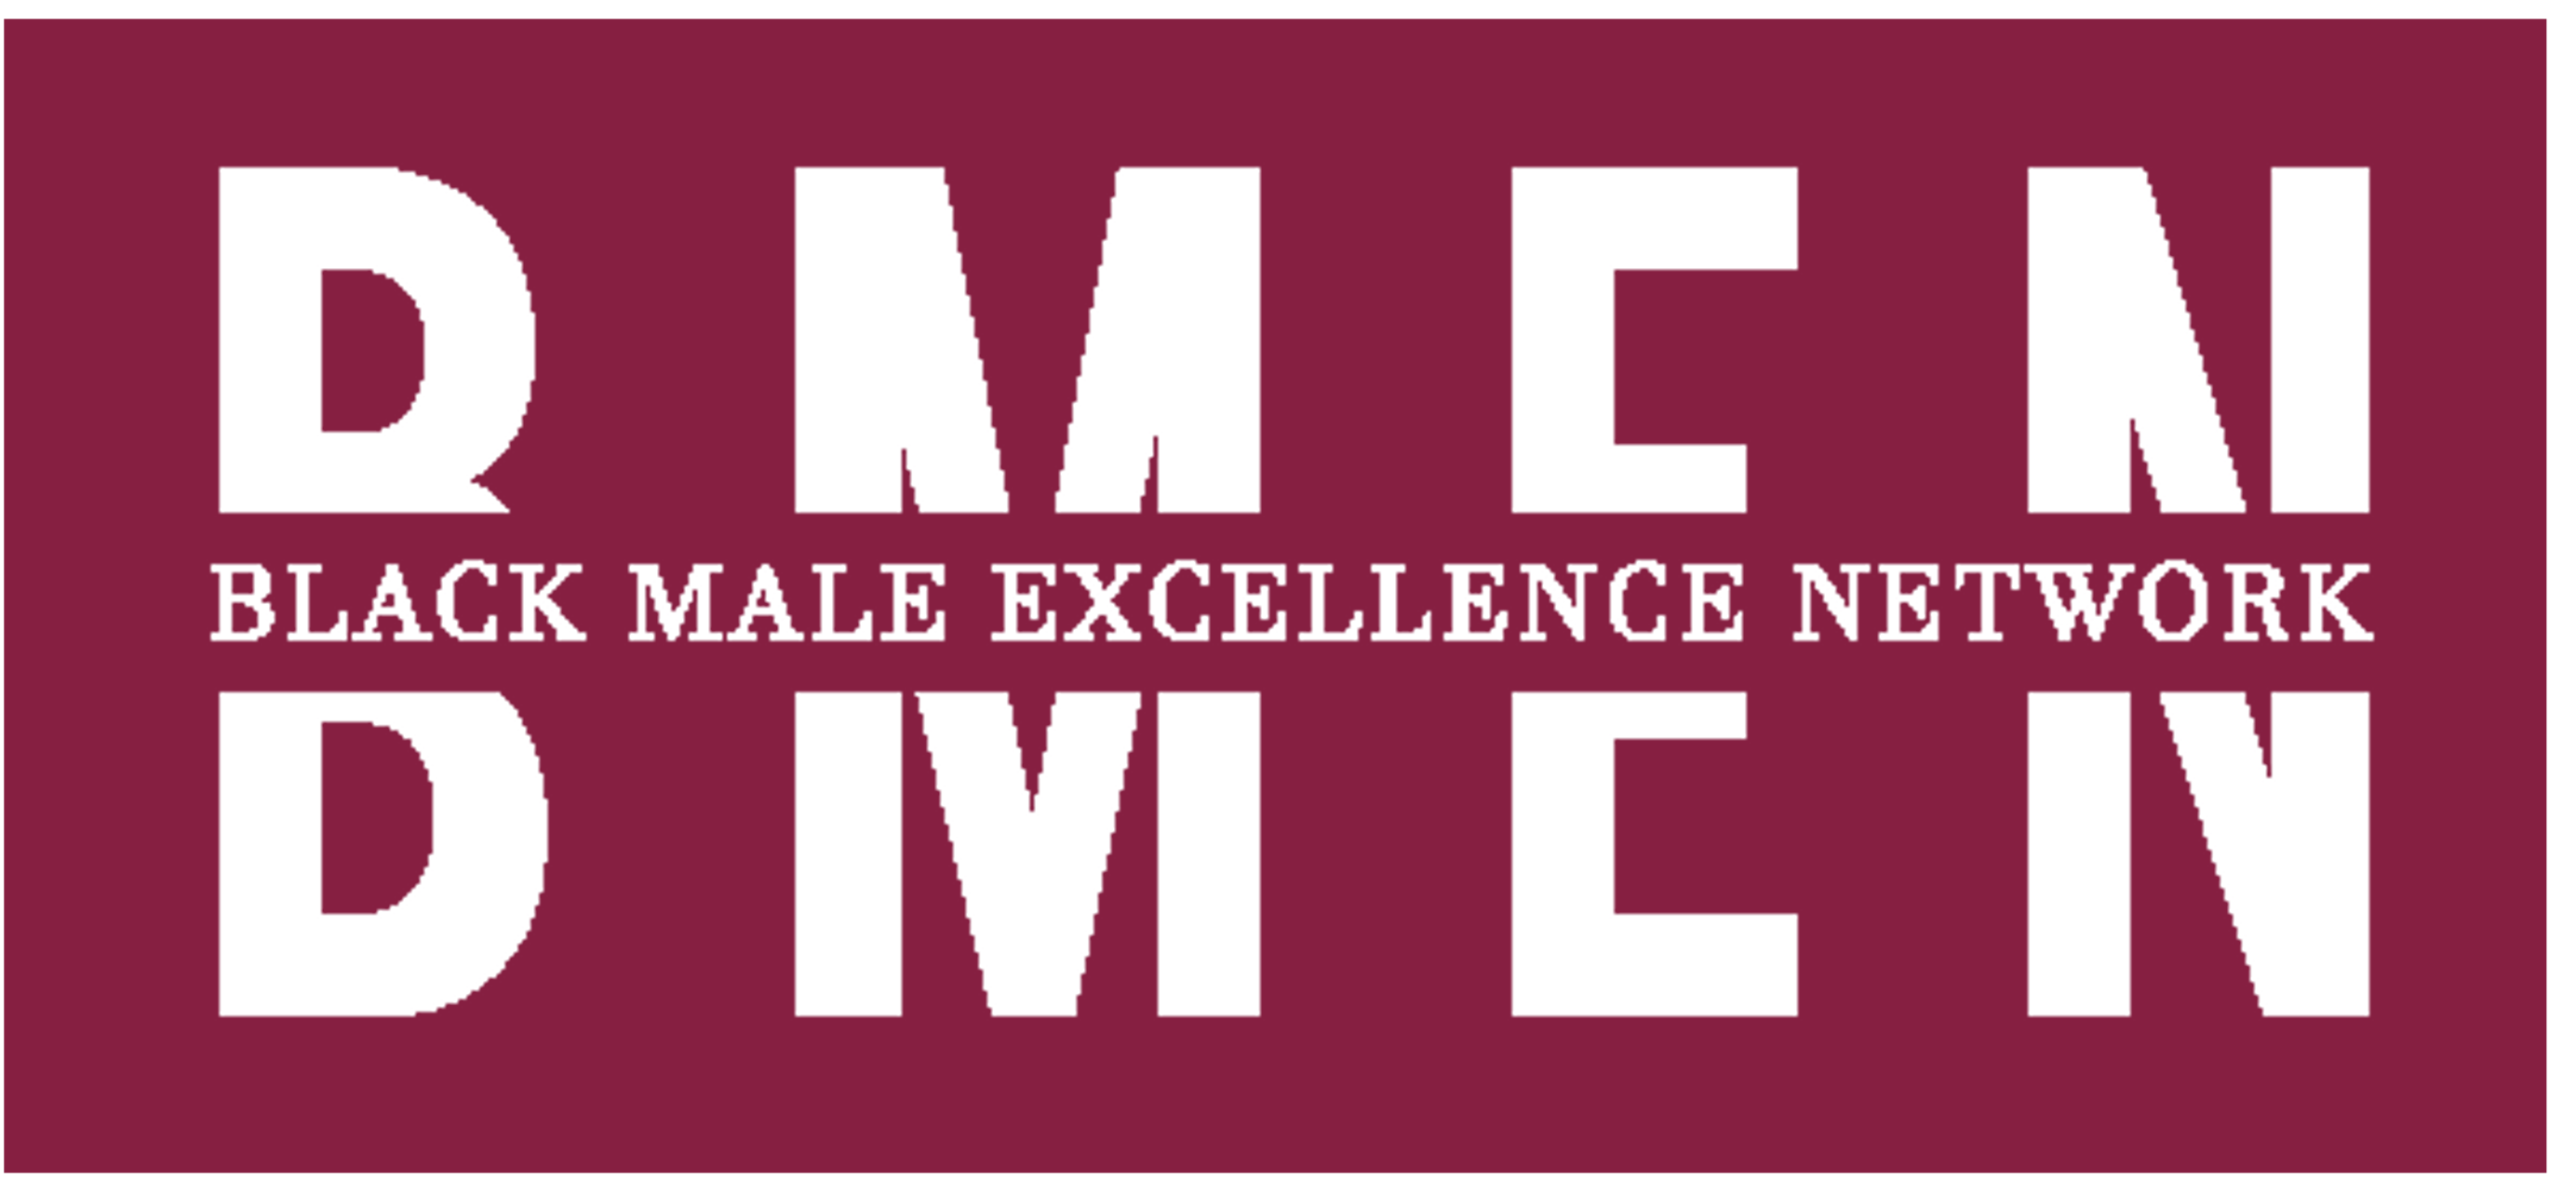 Virginia Tech Black Male Excellence Network